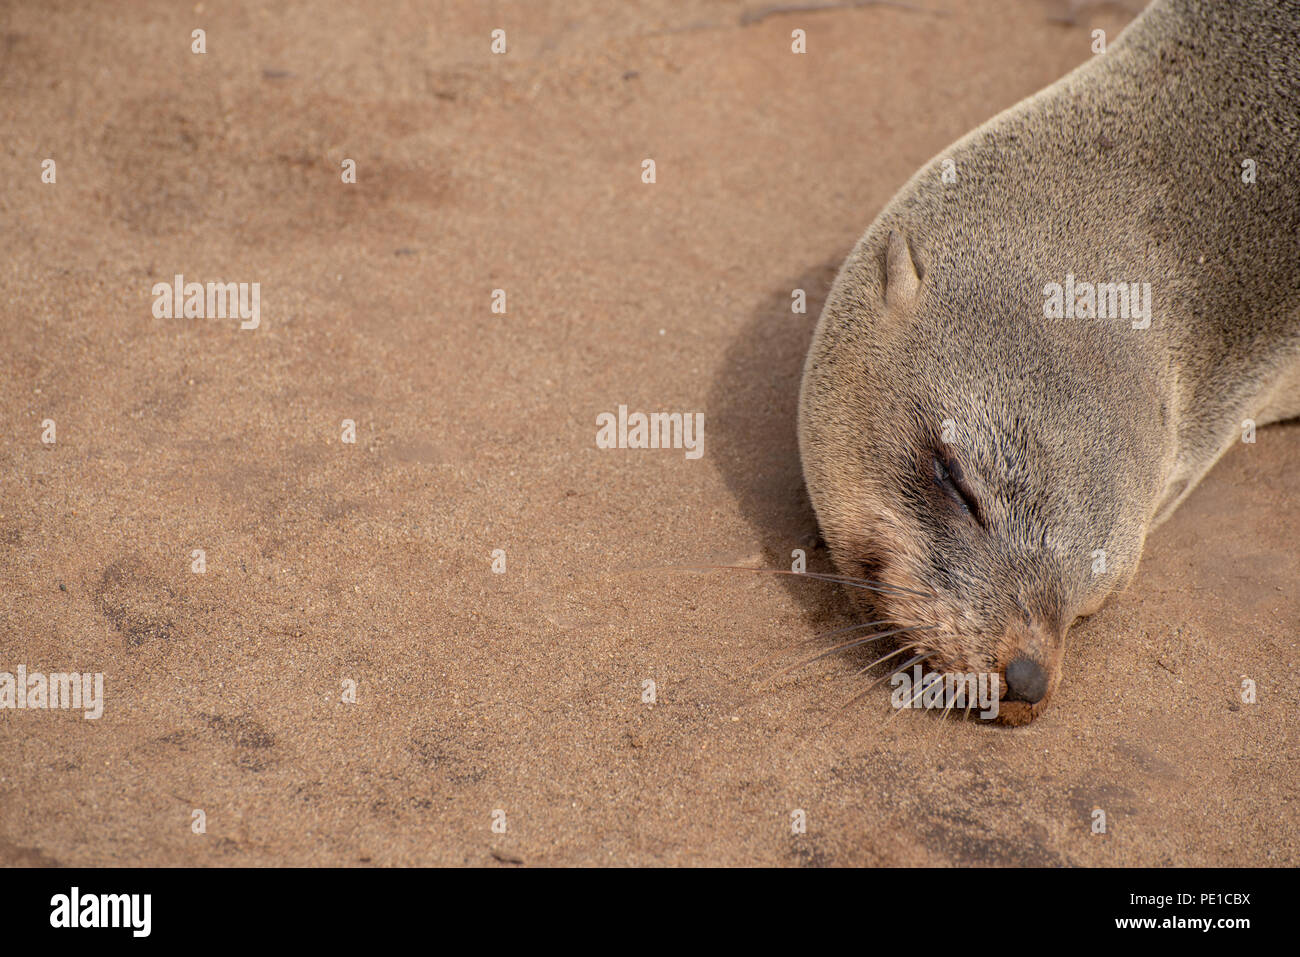 Sleeping seal on beach sand background with text space Stock Photo